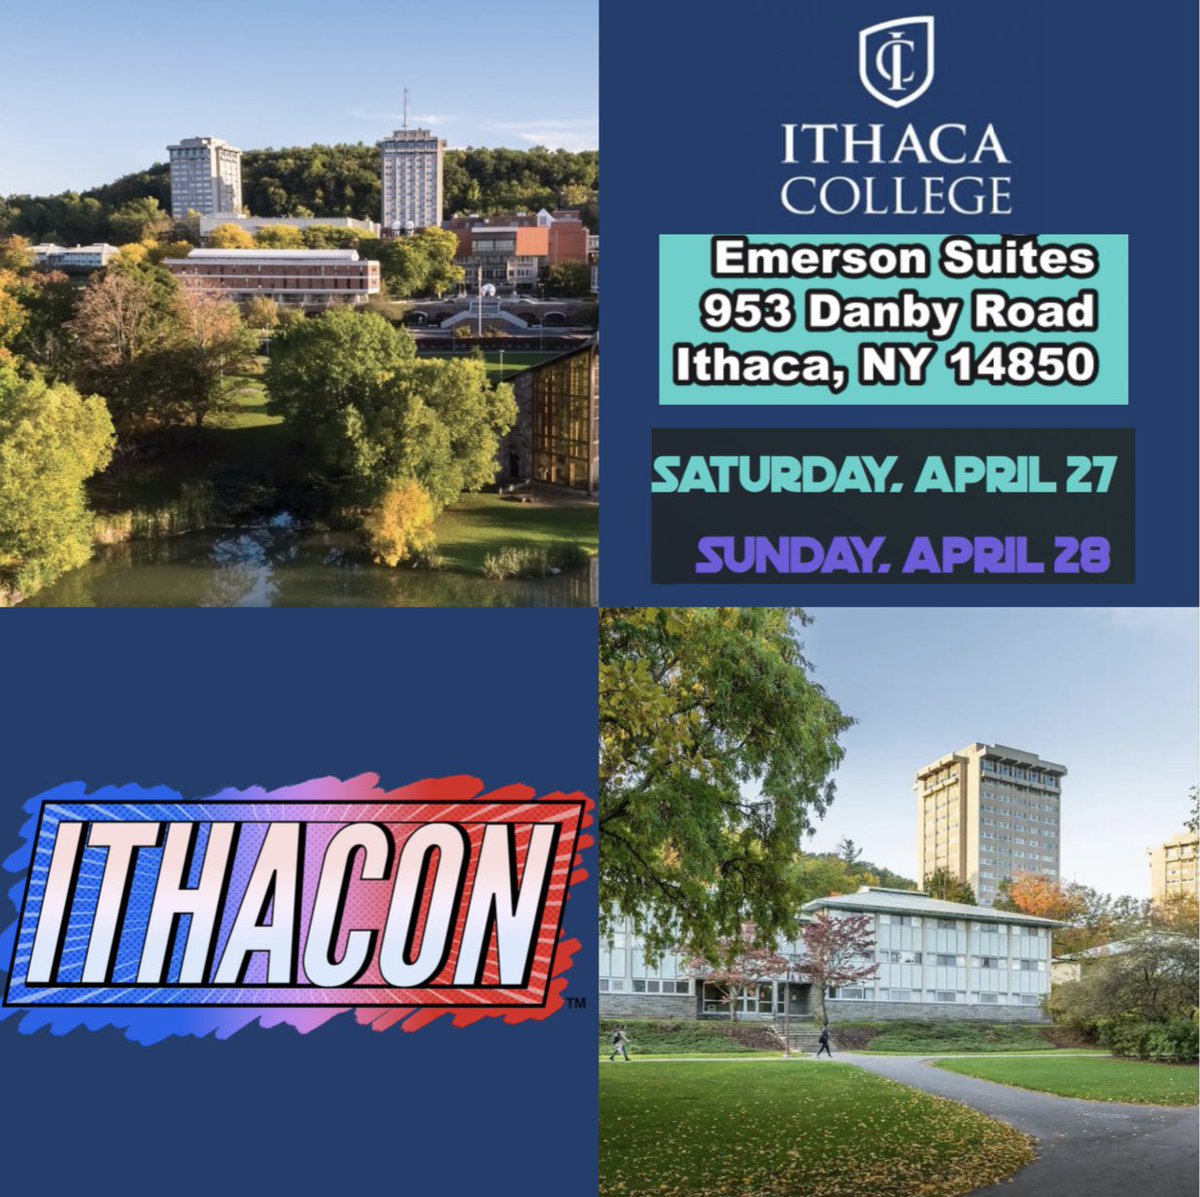 ITHACON is right around the corner! Ithaca College Students and Faculty- we’d love to see you come support Ithaca’s very own comic convention. IC- Tickets are only $10 for both days, and we guarantee you’ll have an amazing time! #ithacacollege #comics #cosplay #collegecomiccon